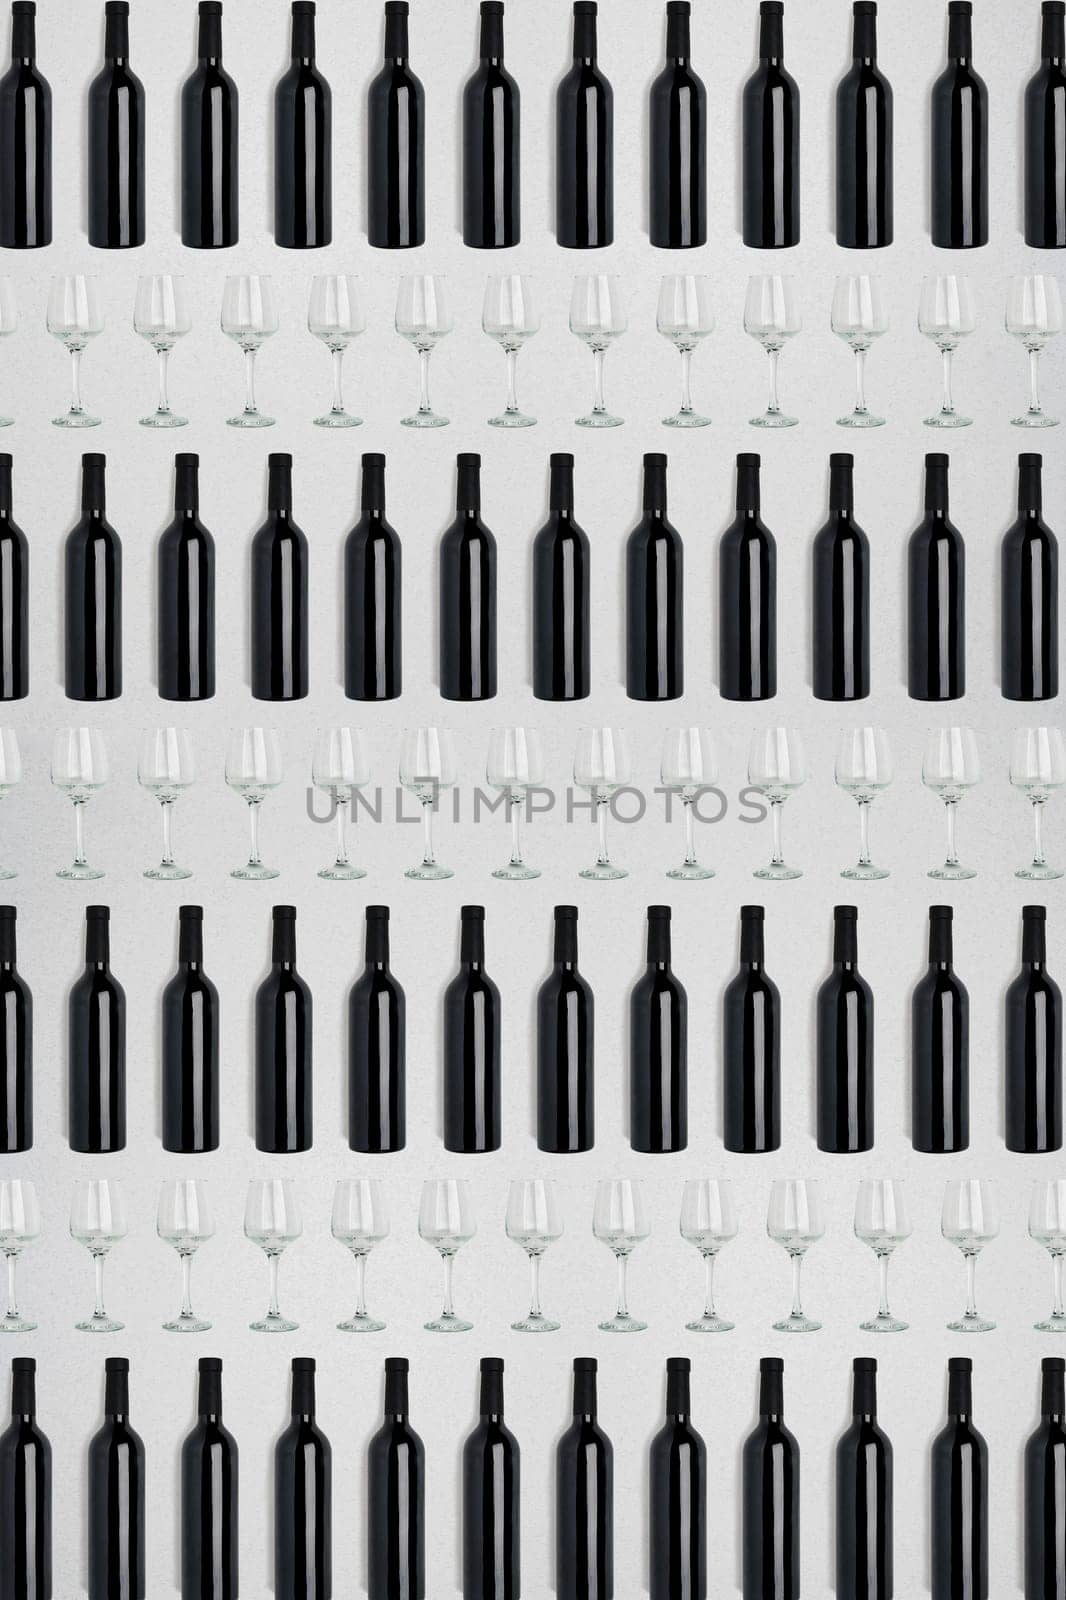 Dark wine bottles and glasses. Creative dark and textured abstract background. A lot of bottles of wine and glasses on a white background. Pattern